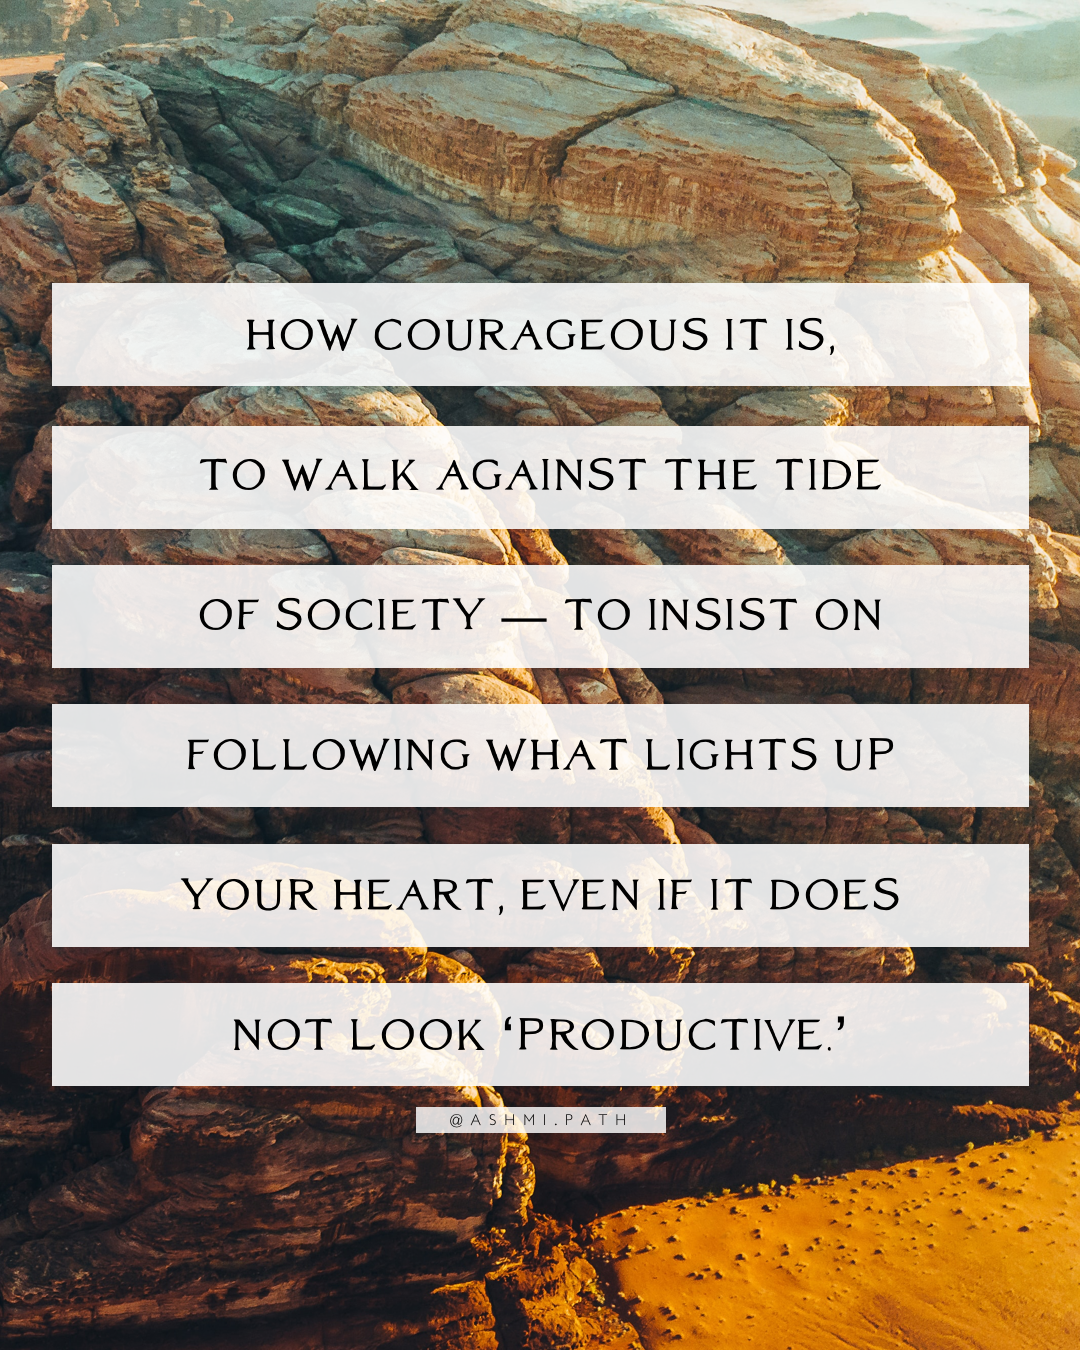 It is Courageous to Follow Your Heart / Redefining 'Productivity'